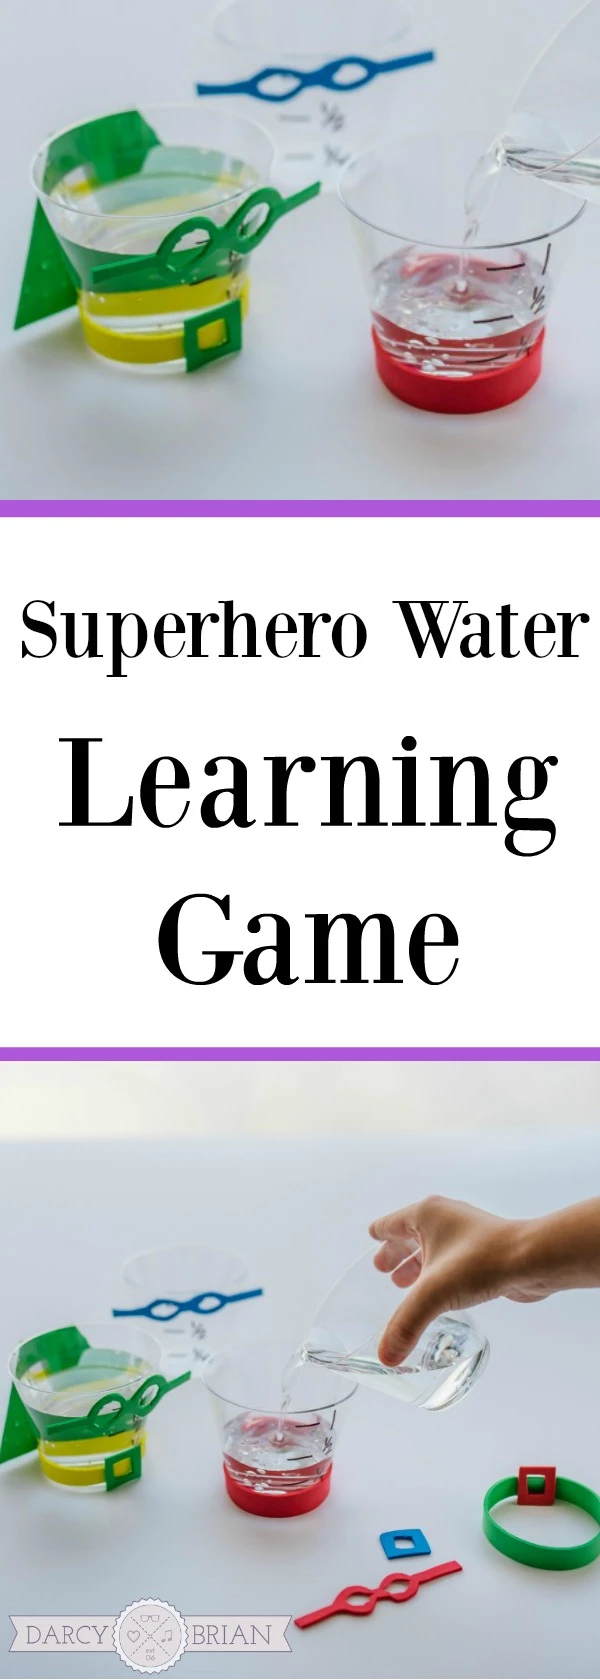 Do your kids love pretending to be a superhero? This Superhero Water game is a fun kids activity that will help teach units of measurement as they pour water. It also encourages creativity as they add super powers. This learning game is loads of fun and simple to set up.